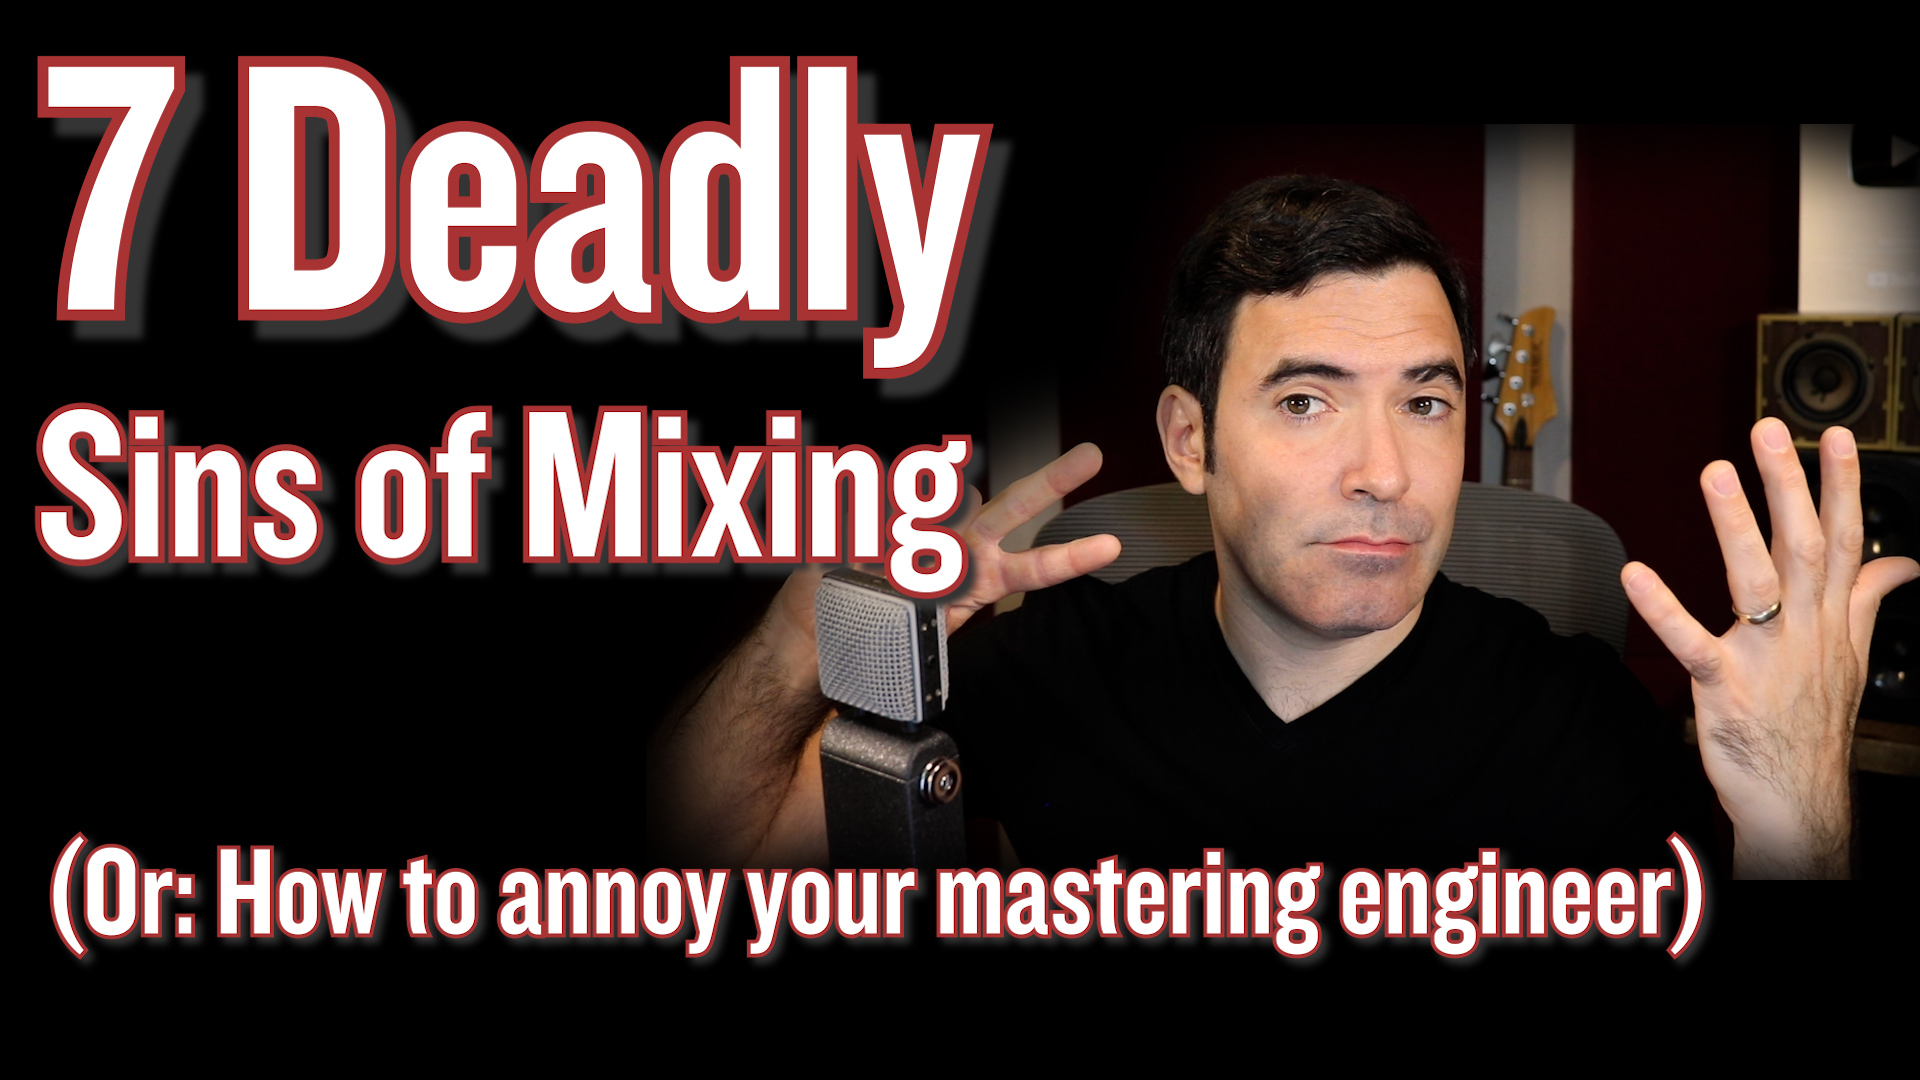 7 Deadly Sins of Mixing (“The mastering engineer’s pet peeves”)